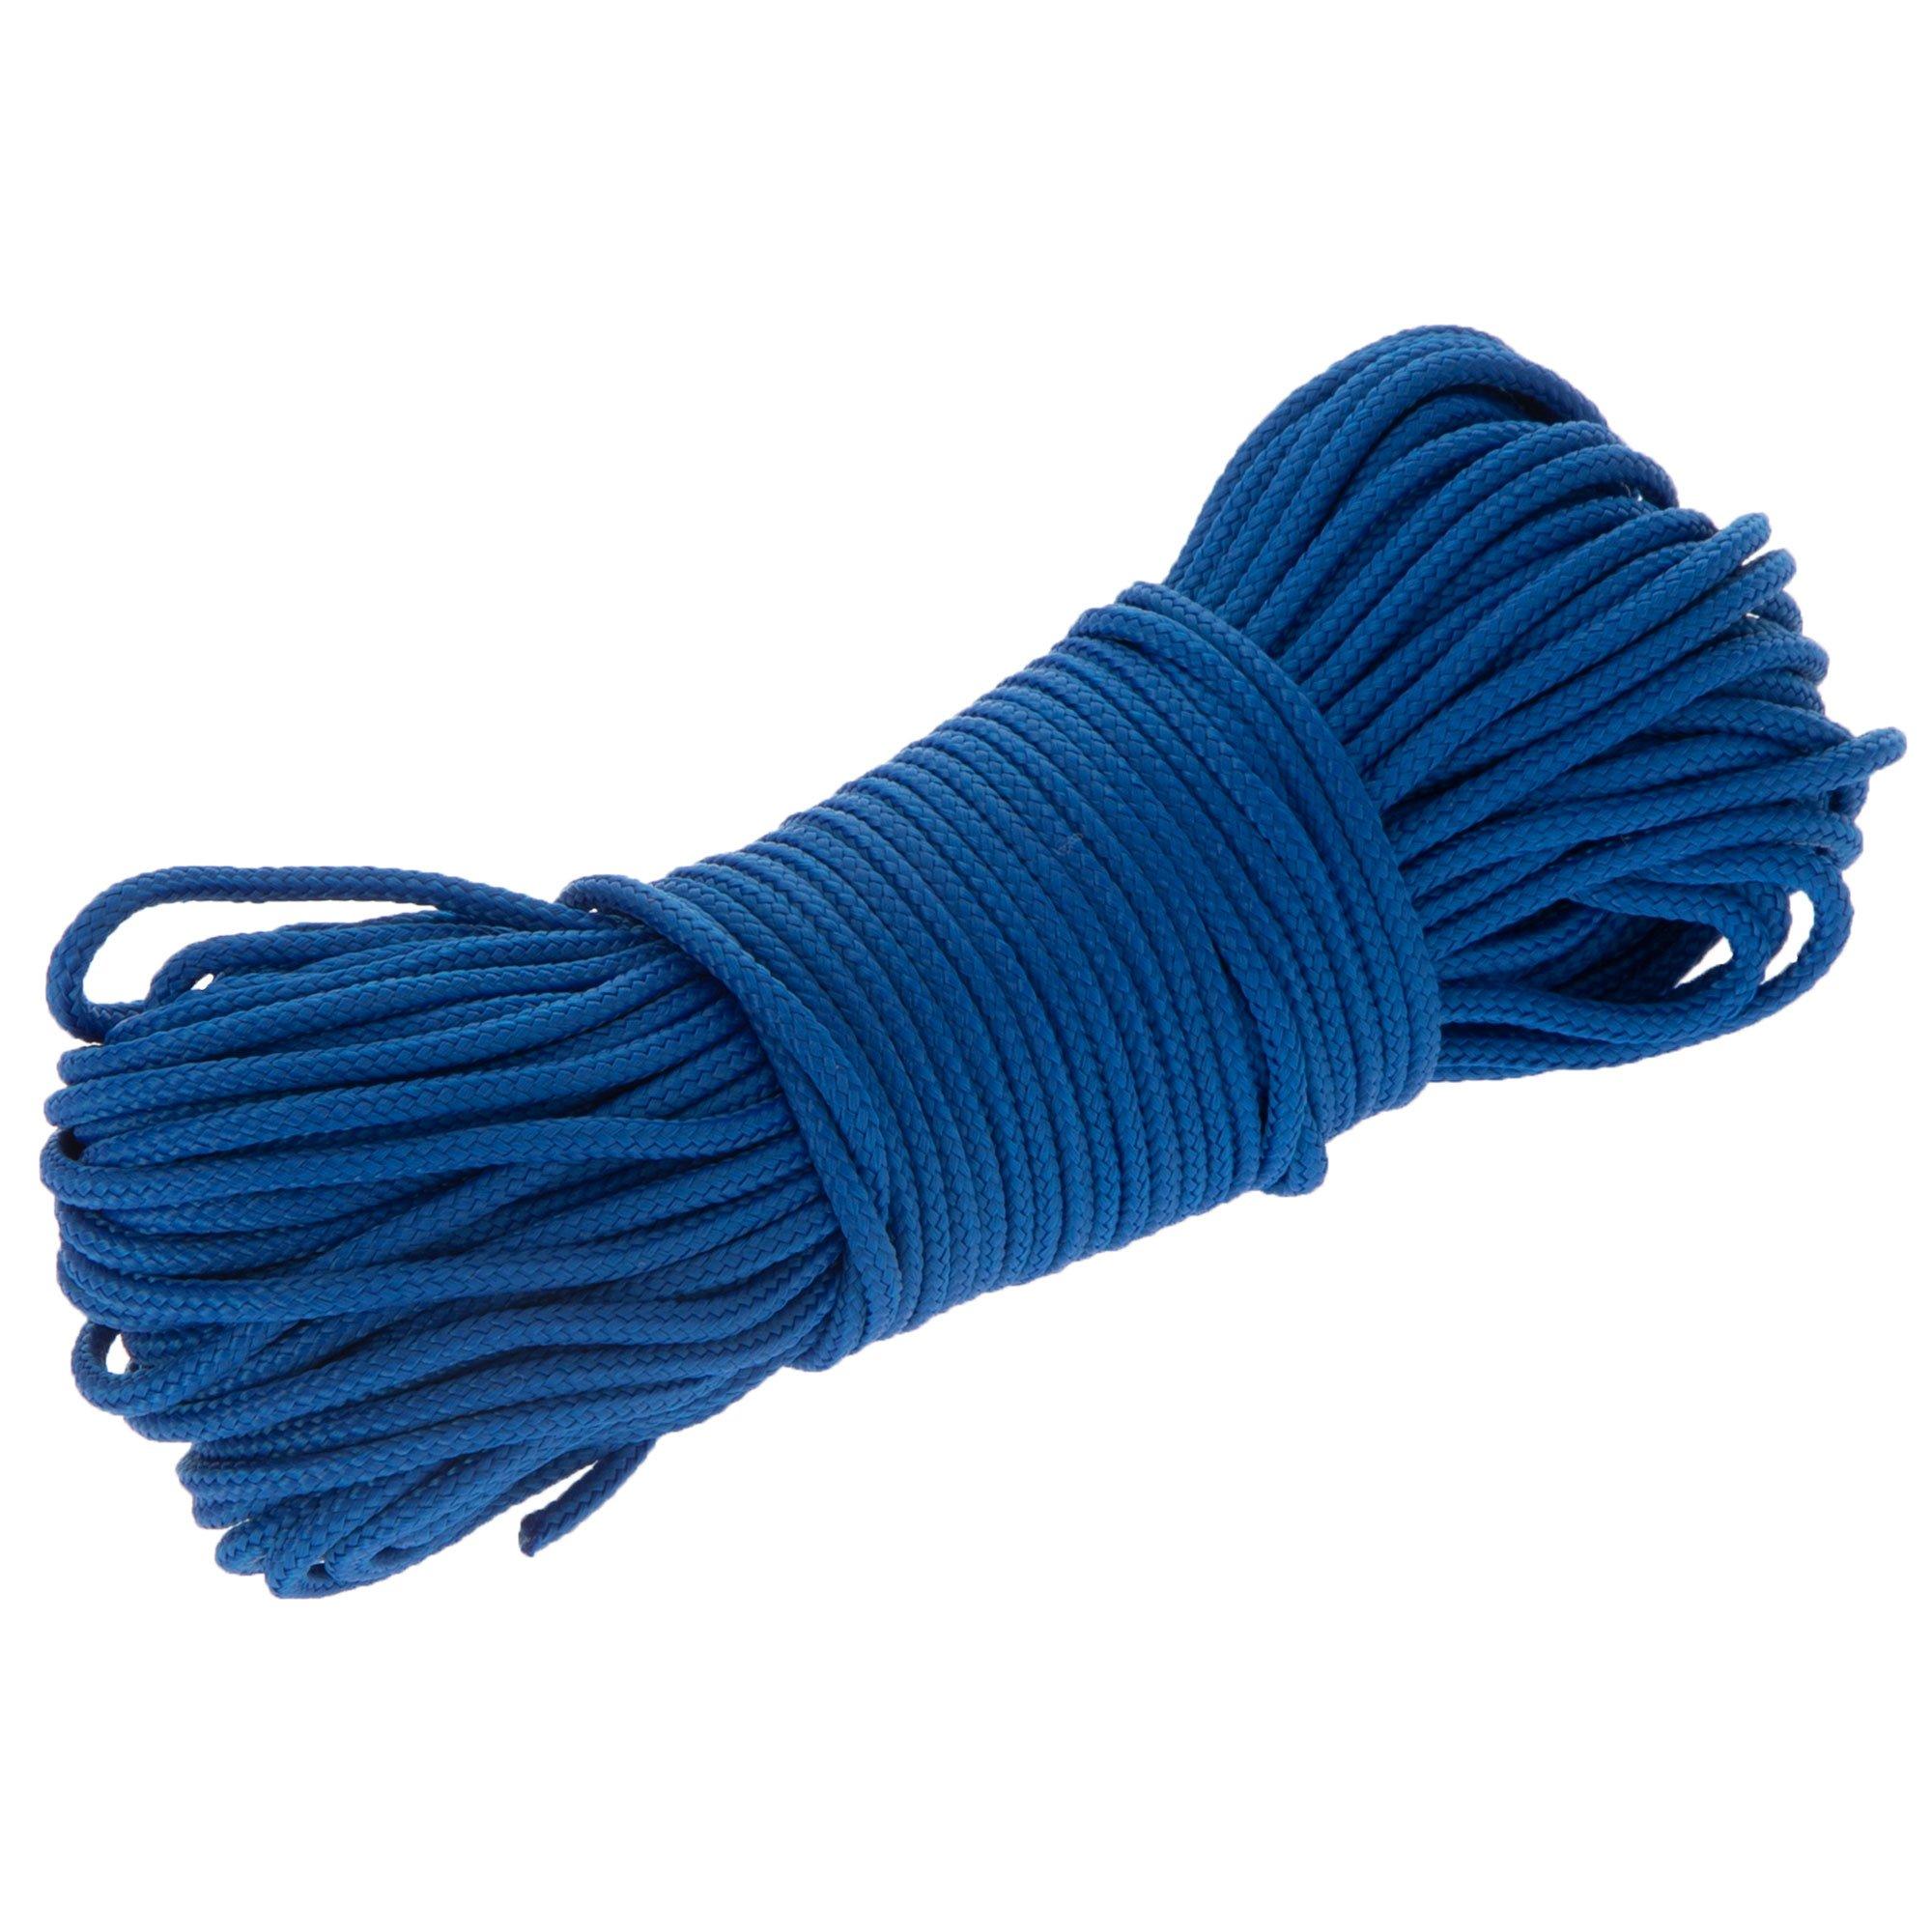 Office, 51 9 Yards 2mm Paracord Parachute Cord Blue